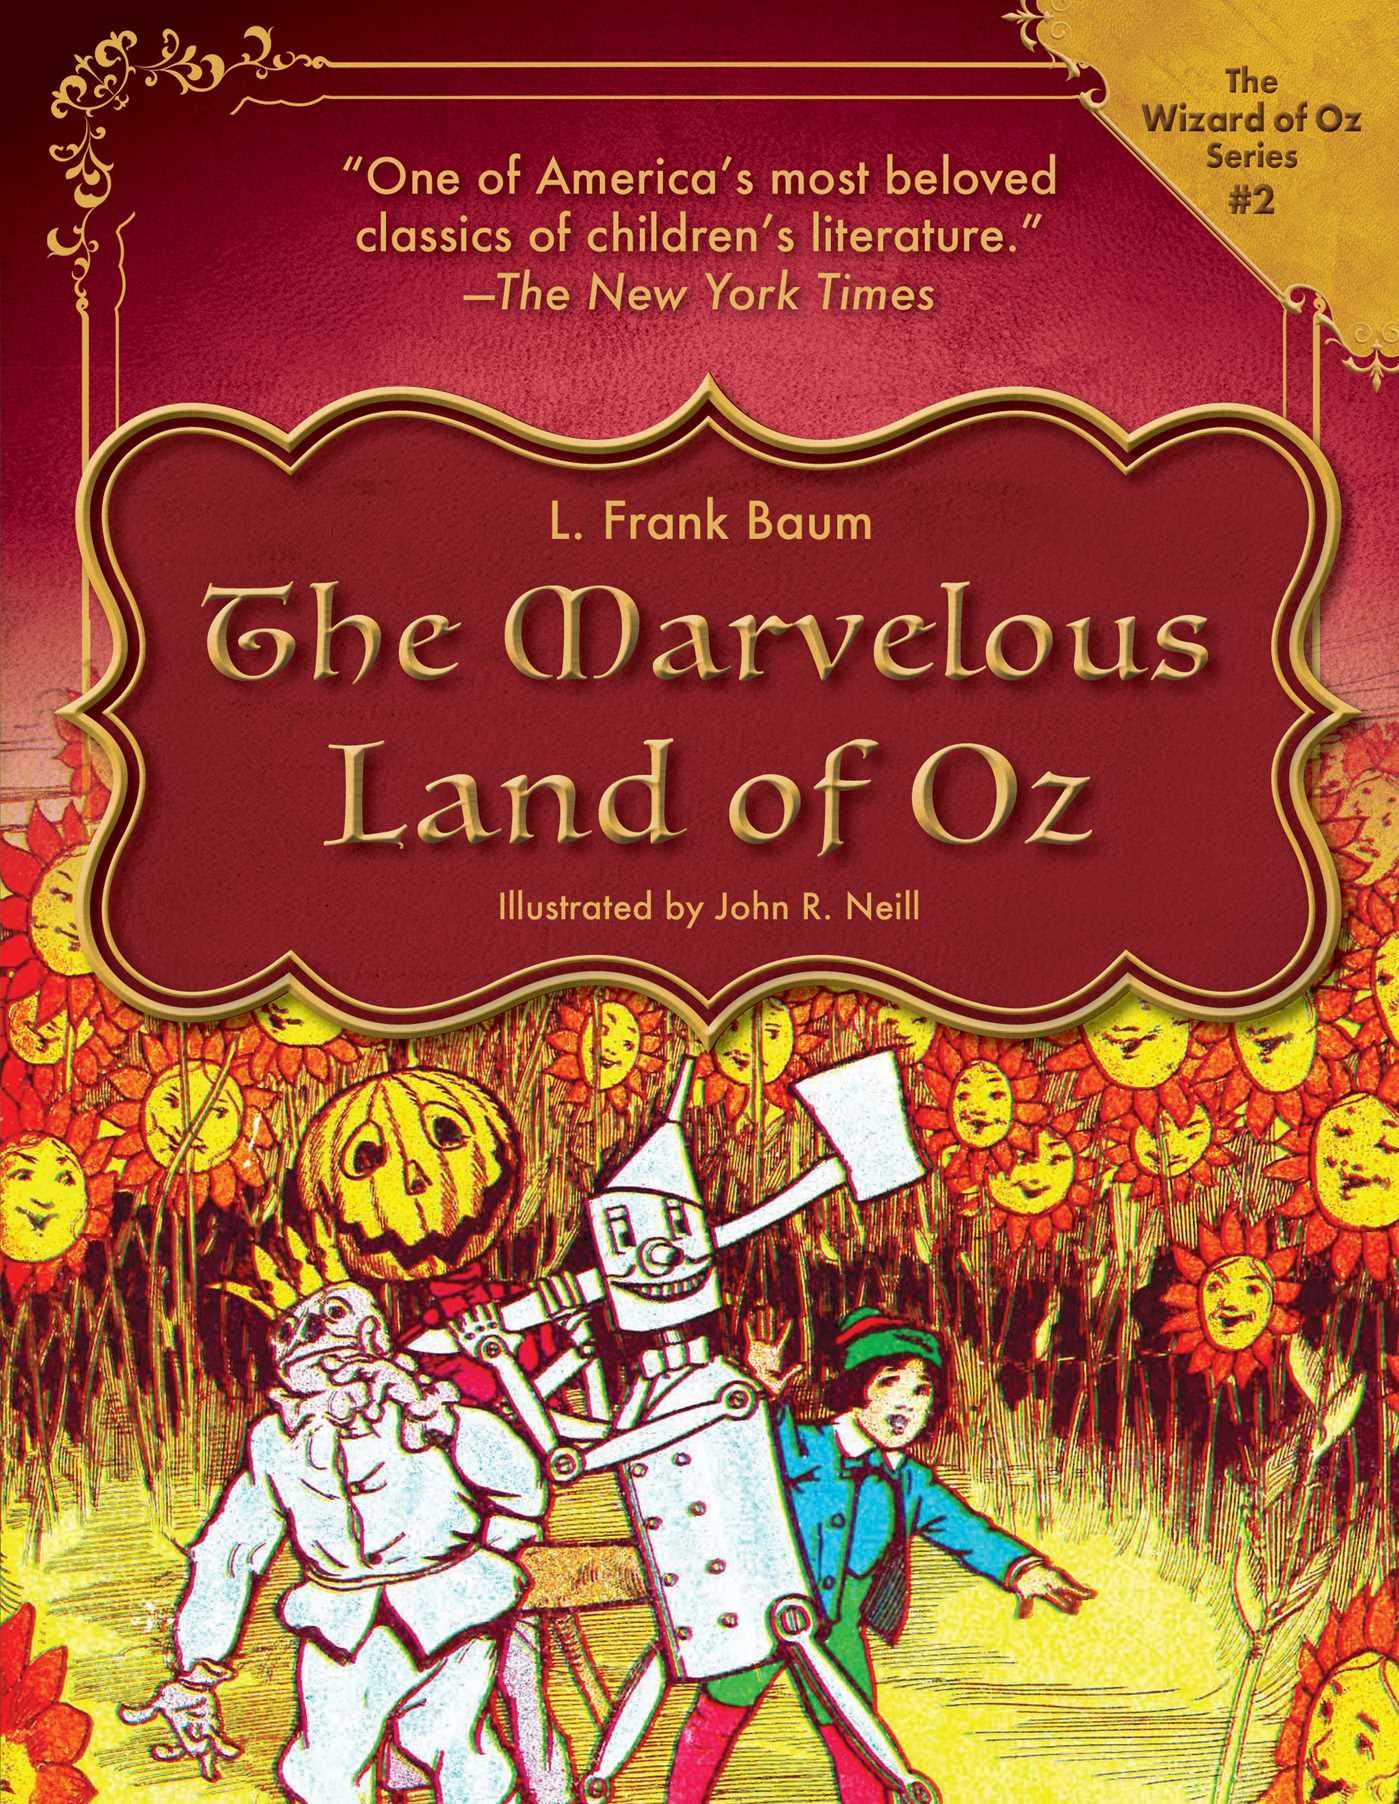 The Marvelous Land of Oz (2) (The Wizard of Oz Series)